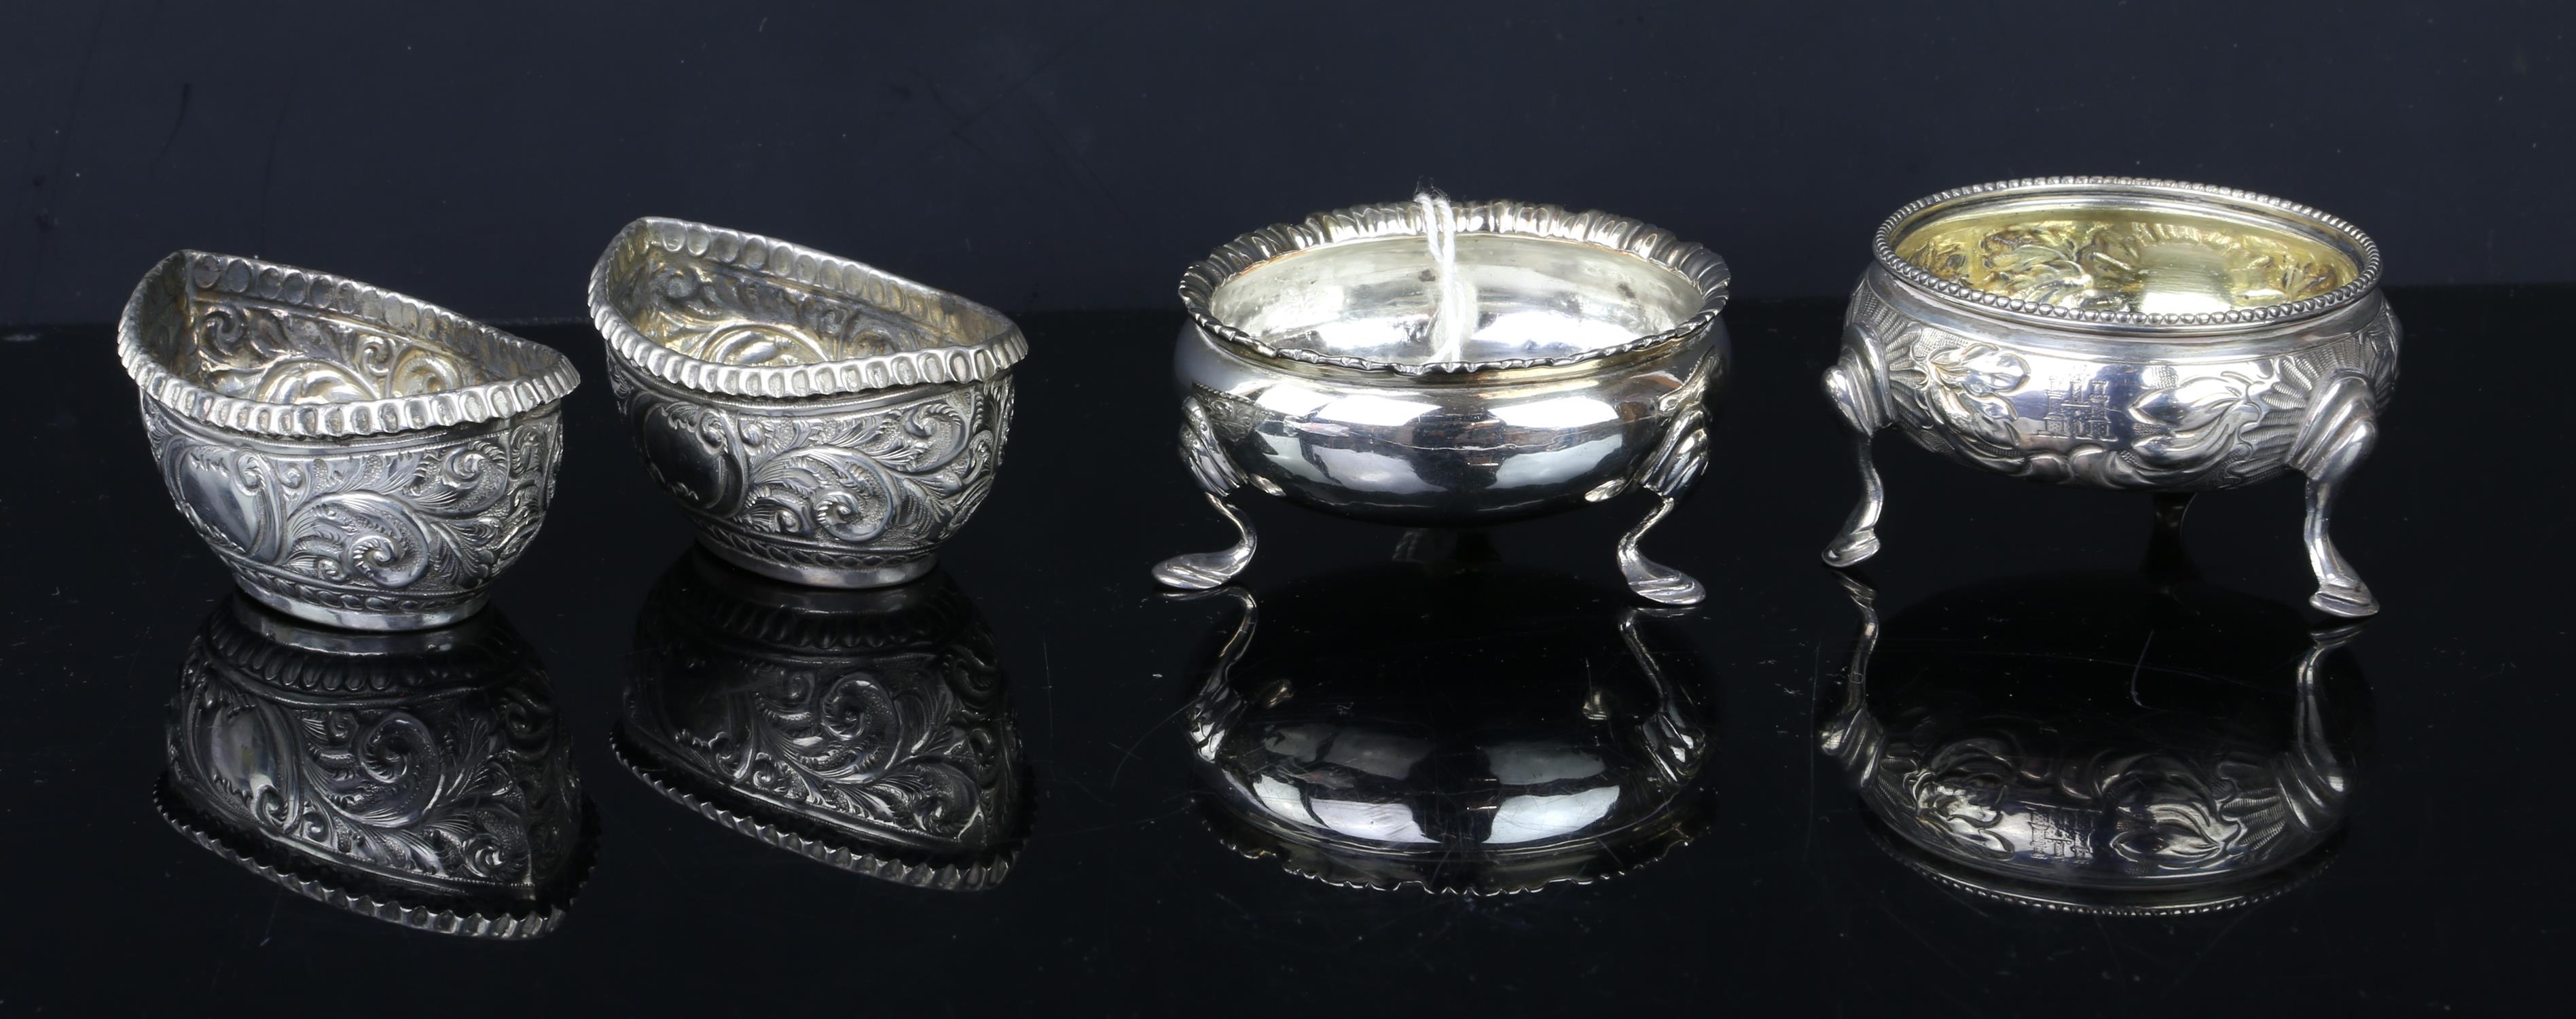 Pair of Edward VII boat shaped silvre salts with embossed decoration, by Mitchell Bosley & Co